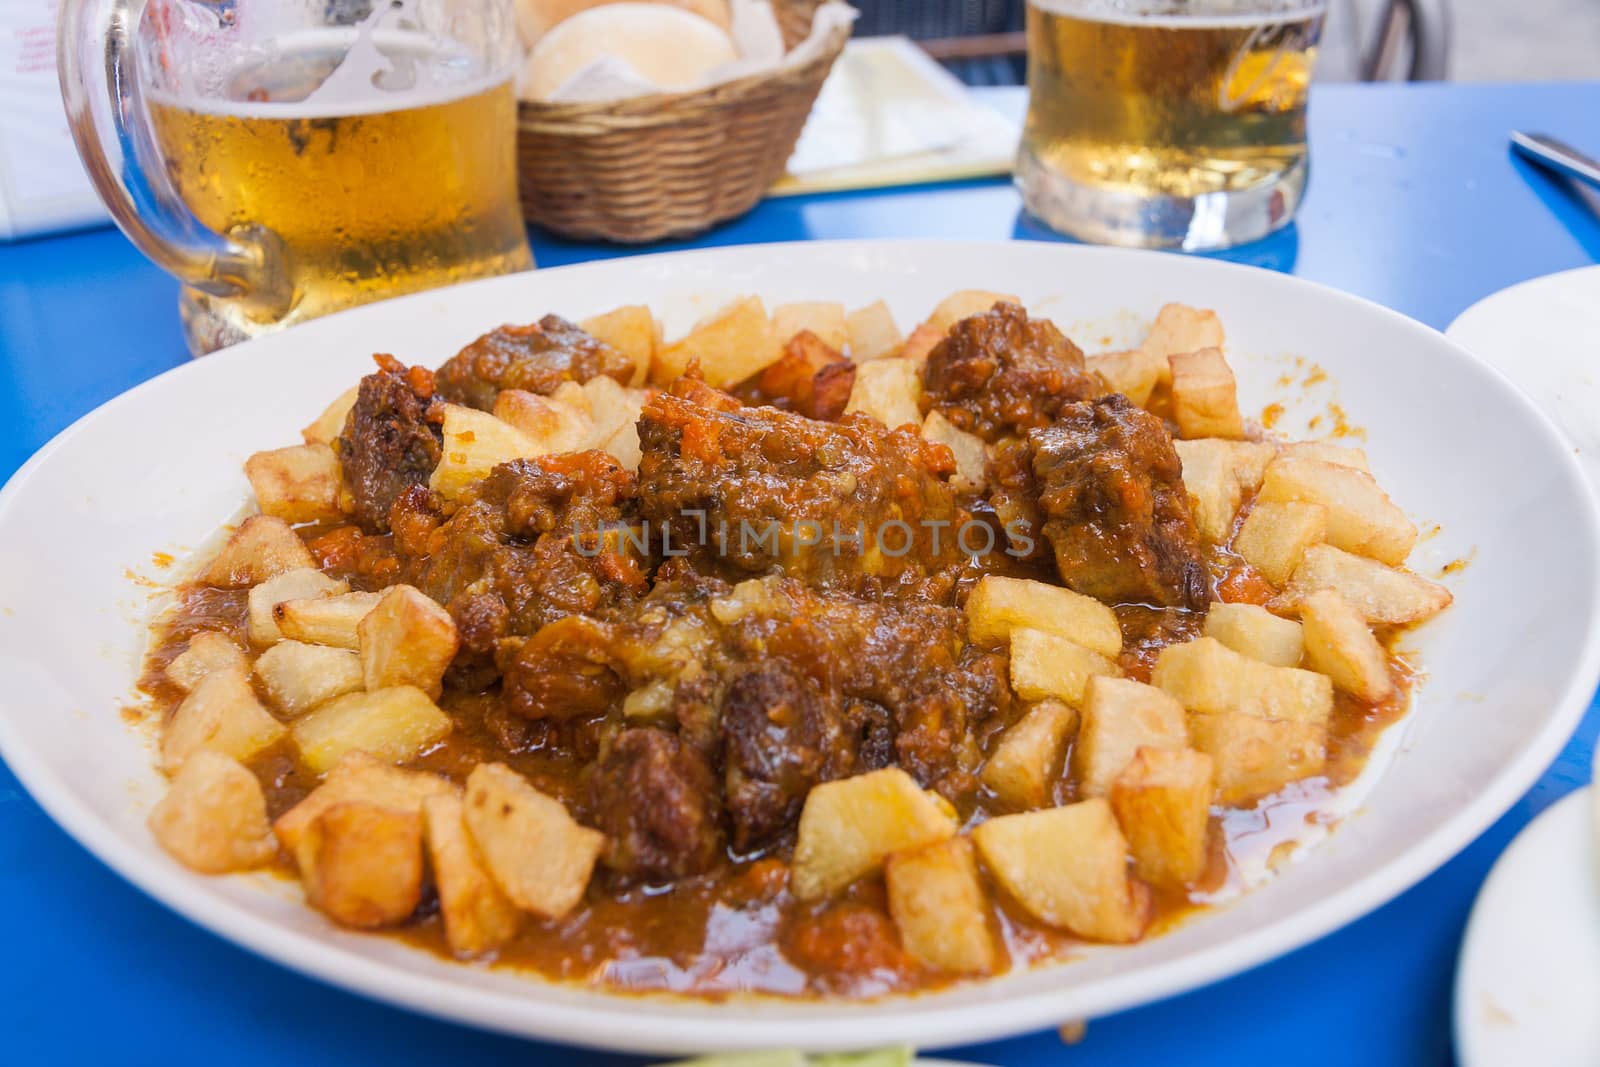 Bull tail stew with fried potatoes. Rustic Spanish style cuisine.